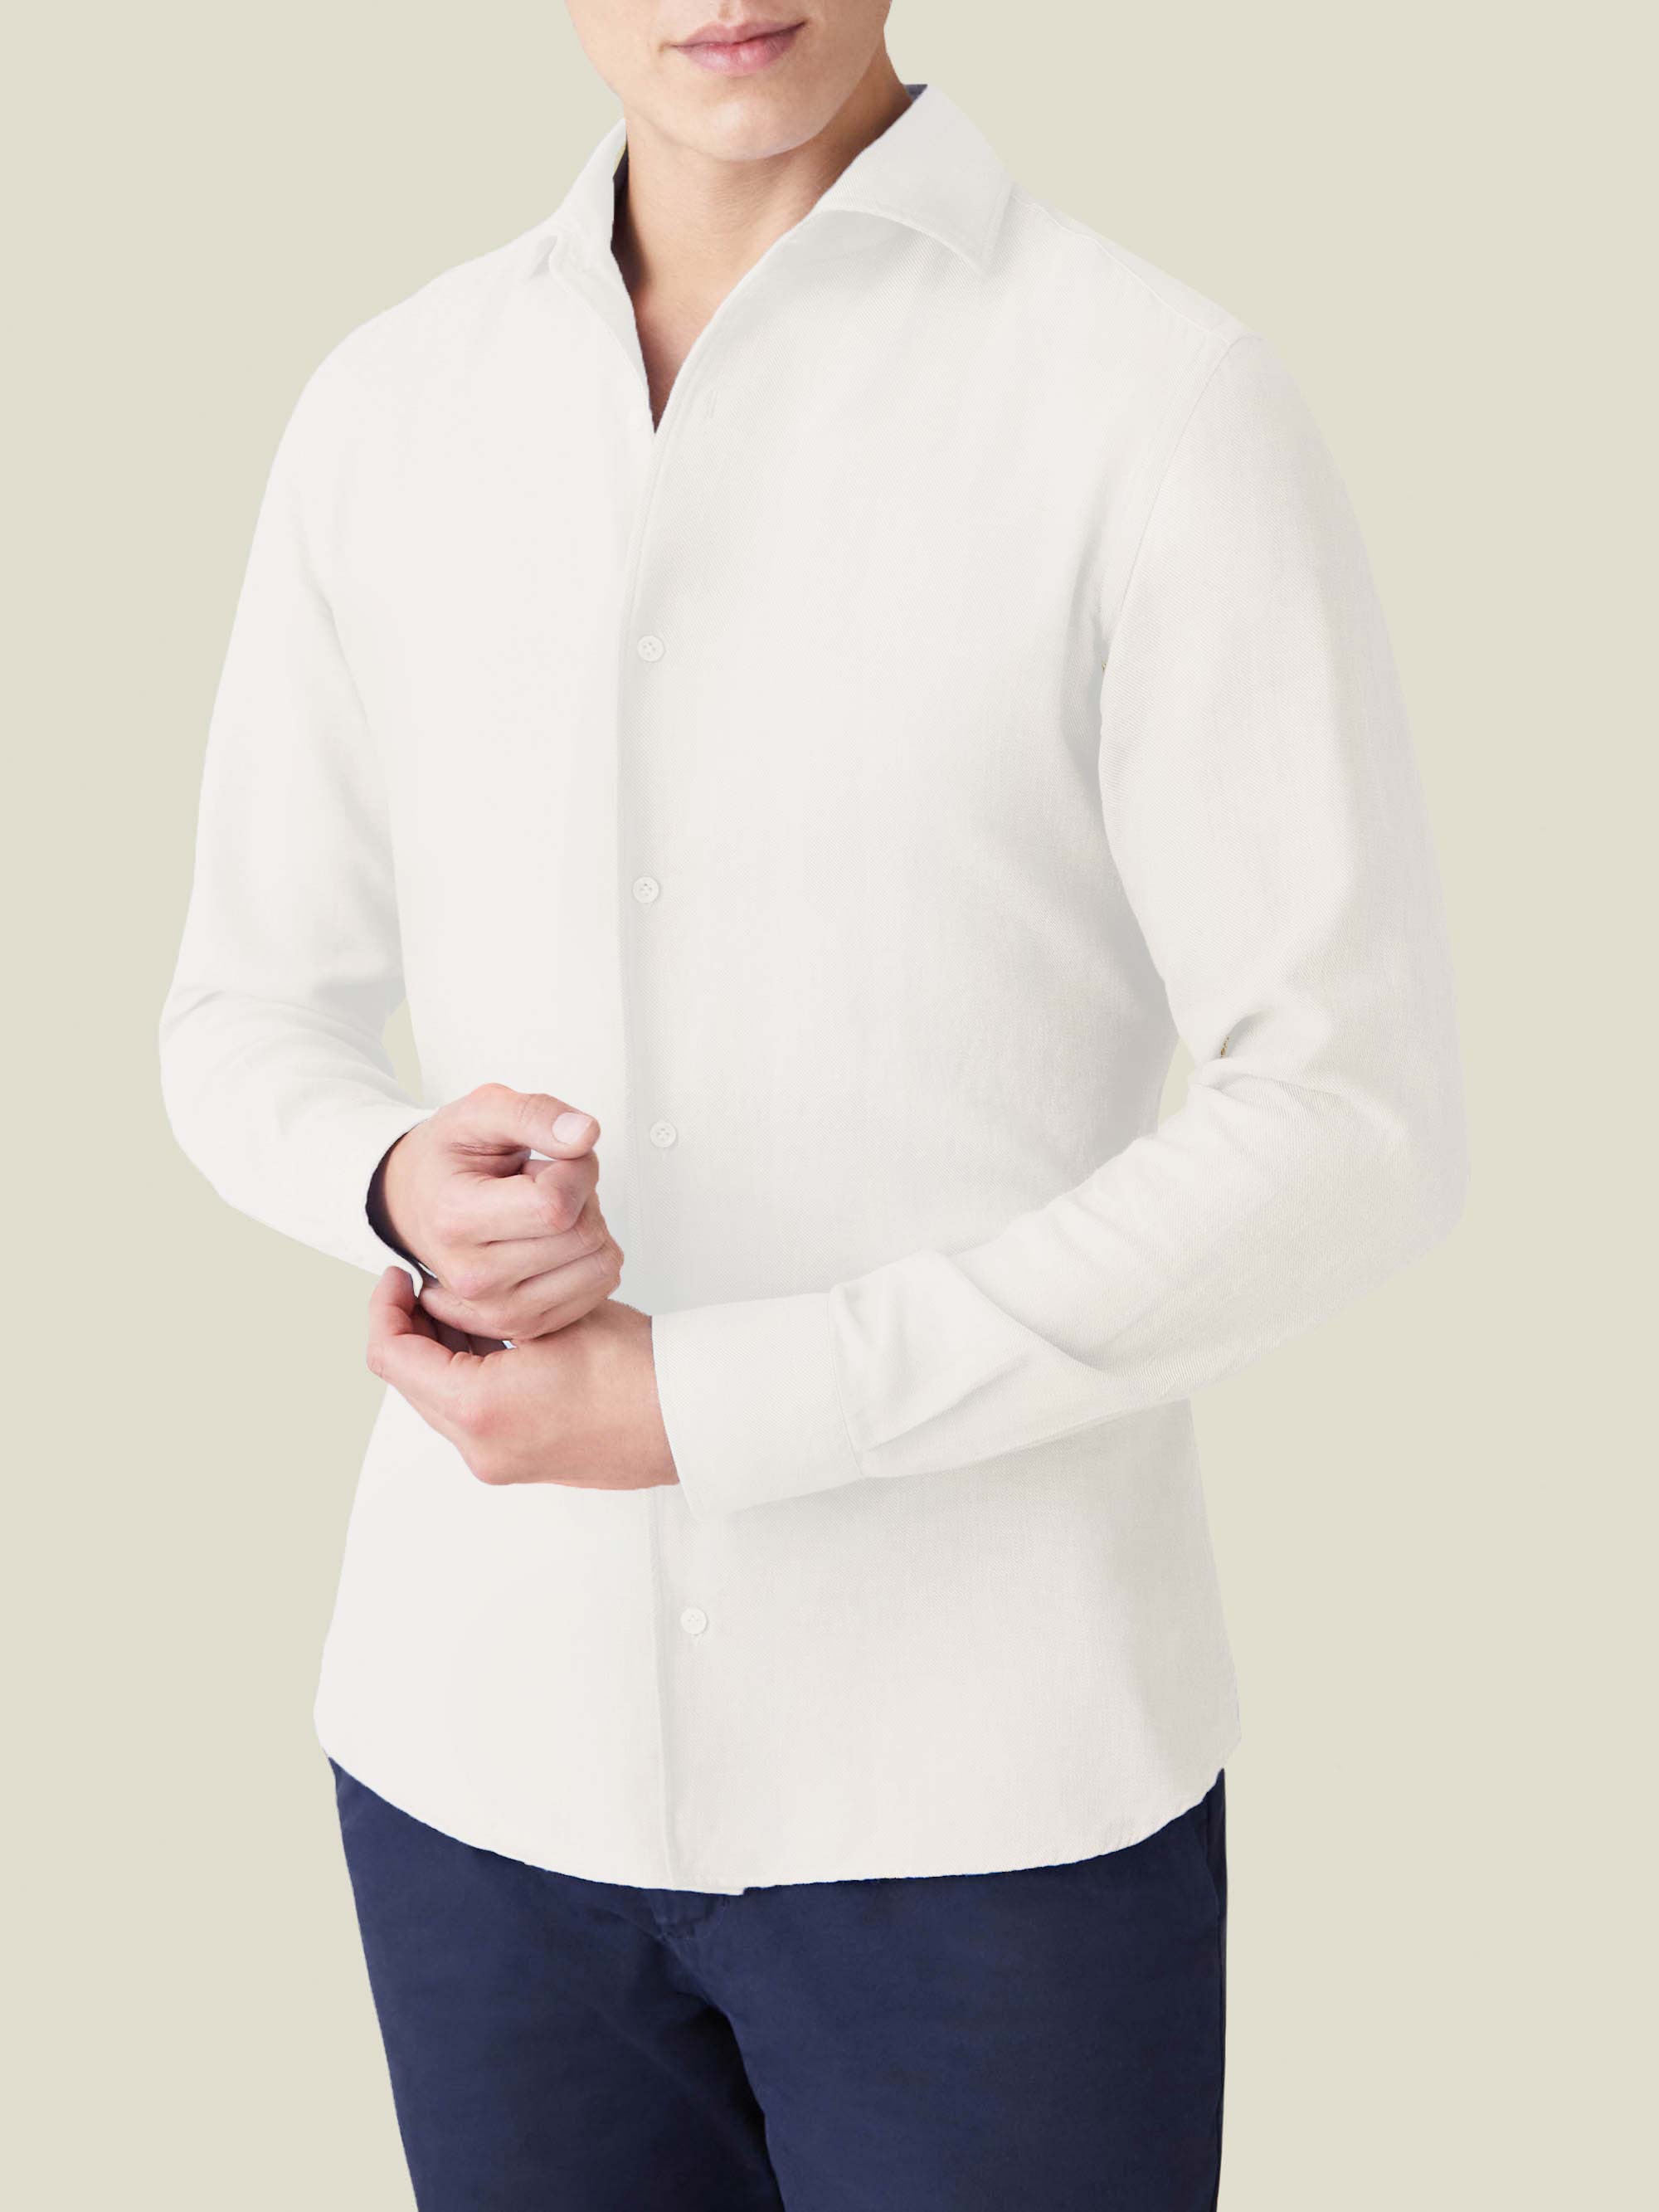 Luca Faloni - Men's White Cashmere-Cotton Shirt - Made in Italy